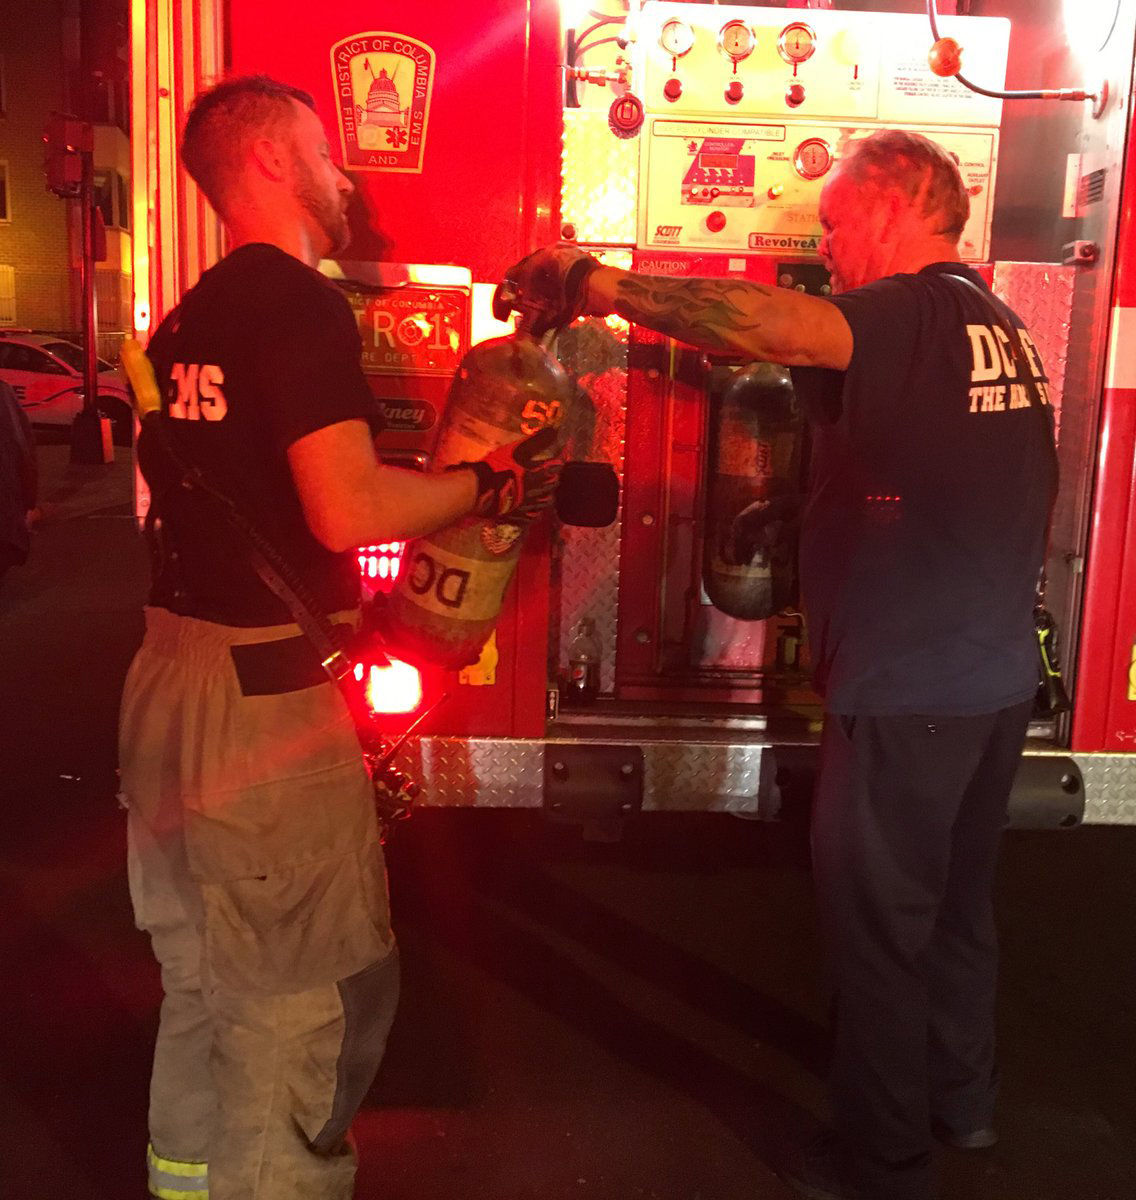 Firefighters filling their air bottles on the scene of a fire on M Street Northwest near downtown D.C. Saturday morning. Investigators are still on scene working to determine the cause of the fire. (Courtesy D.C. Fire and EMS via Twitter)